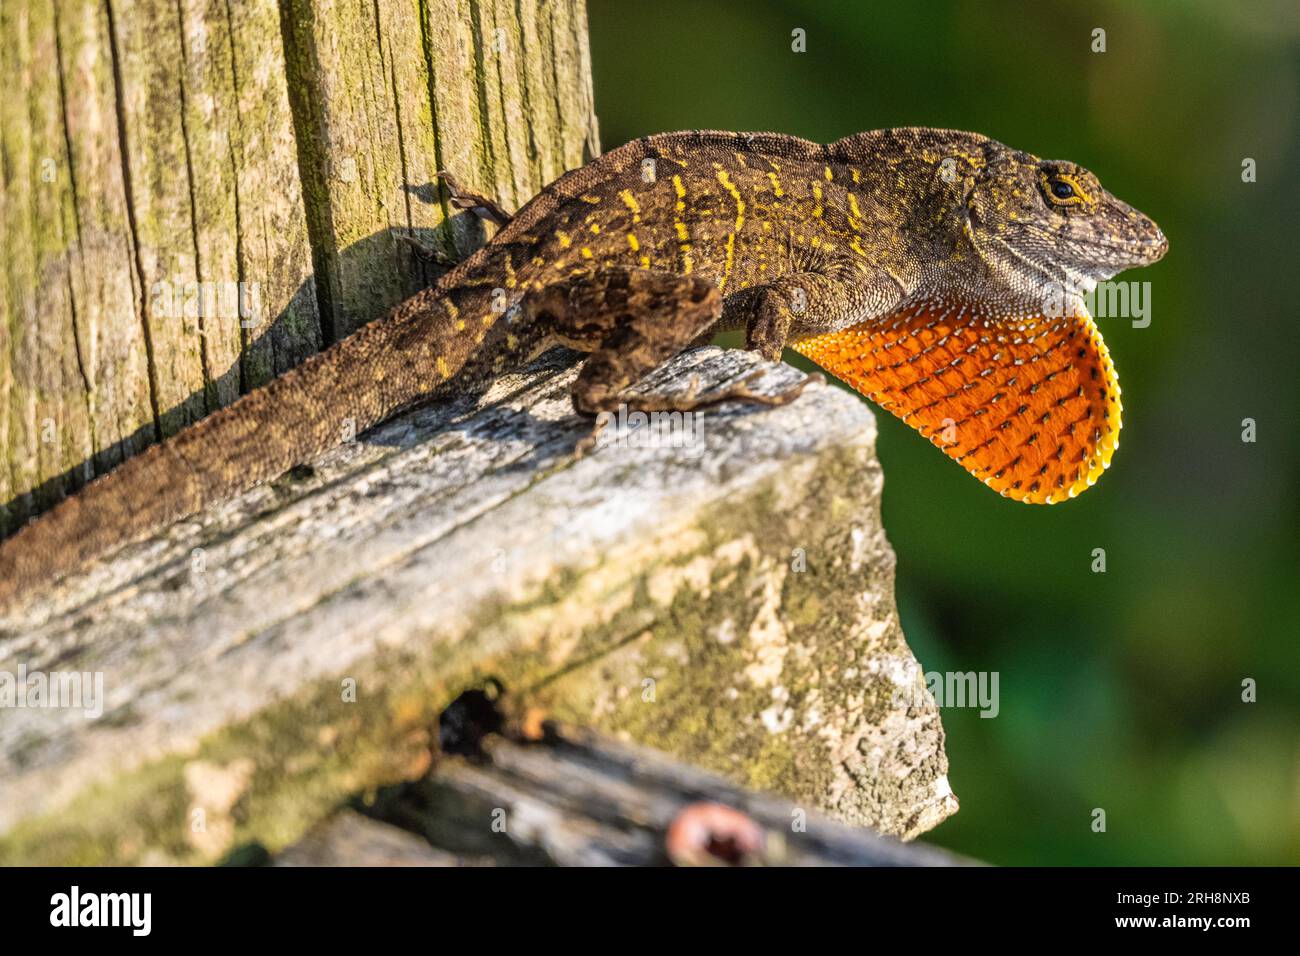 Large brown anole (Anolis sagrei) with vivd orange dewlap sunning on a beach access boardwalk in Ponte Vedra Beacch, Florida. (USA) Stock Photo